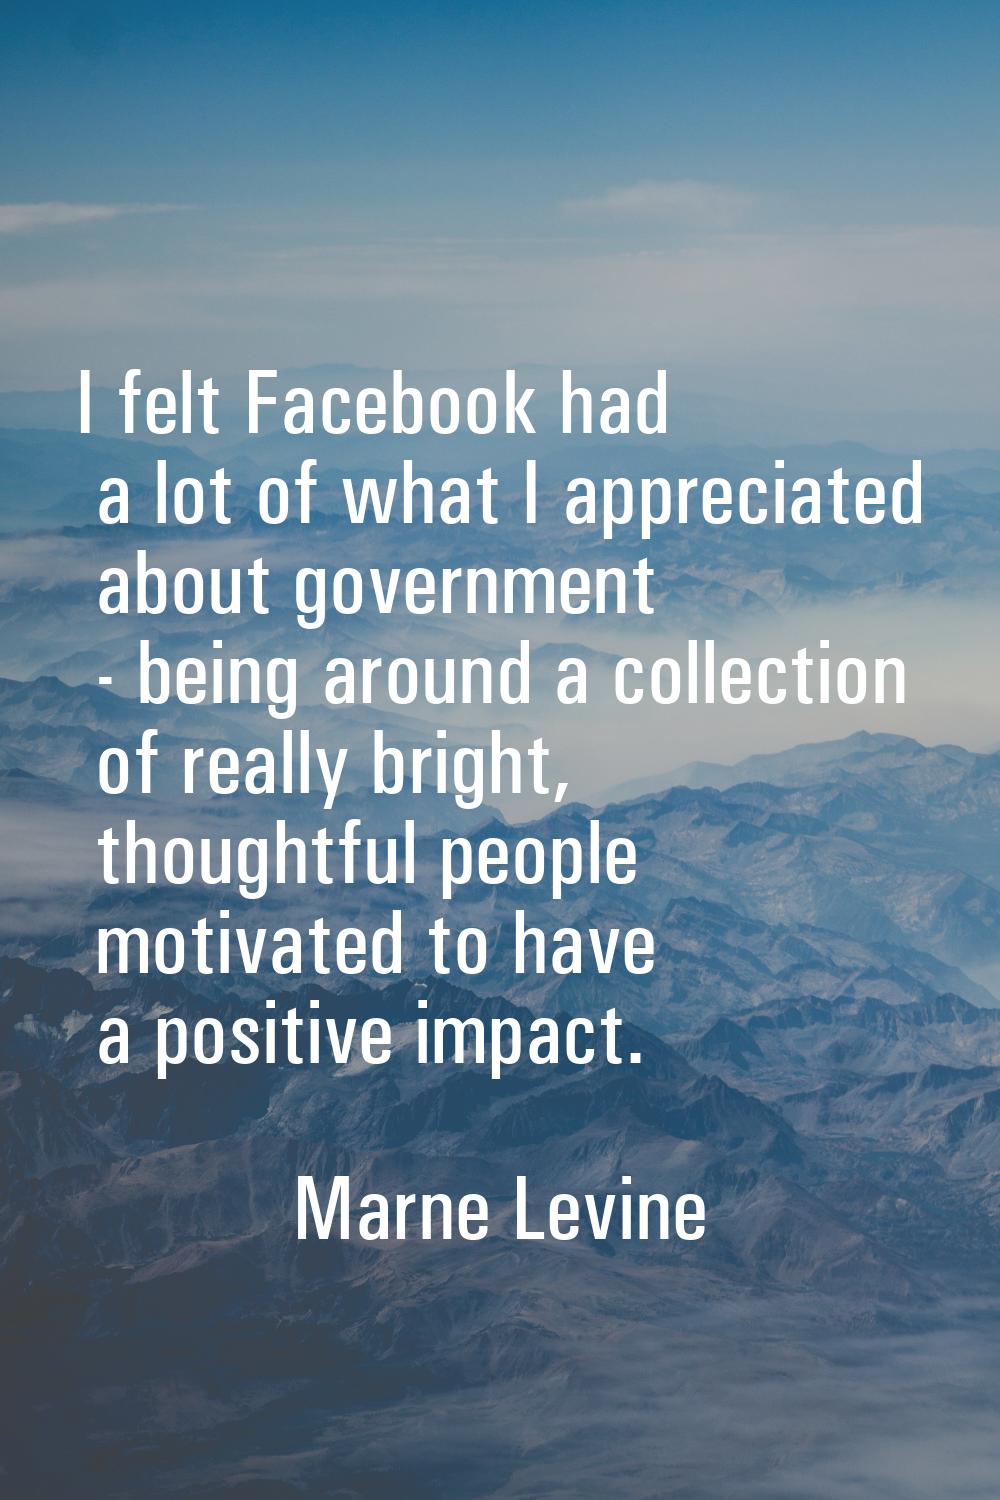 I felt Facebook had a lot of what I appreciated about government - being around a collection of rea